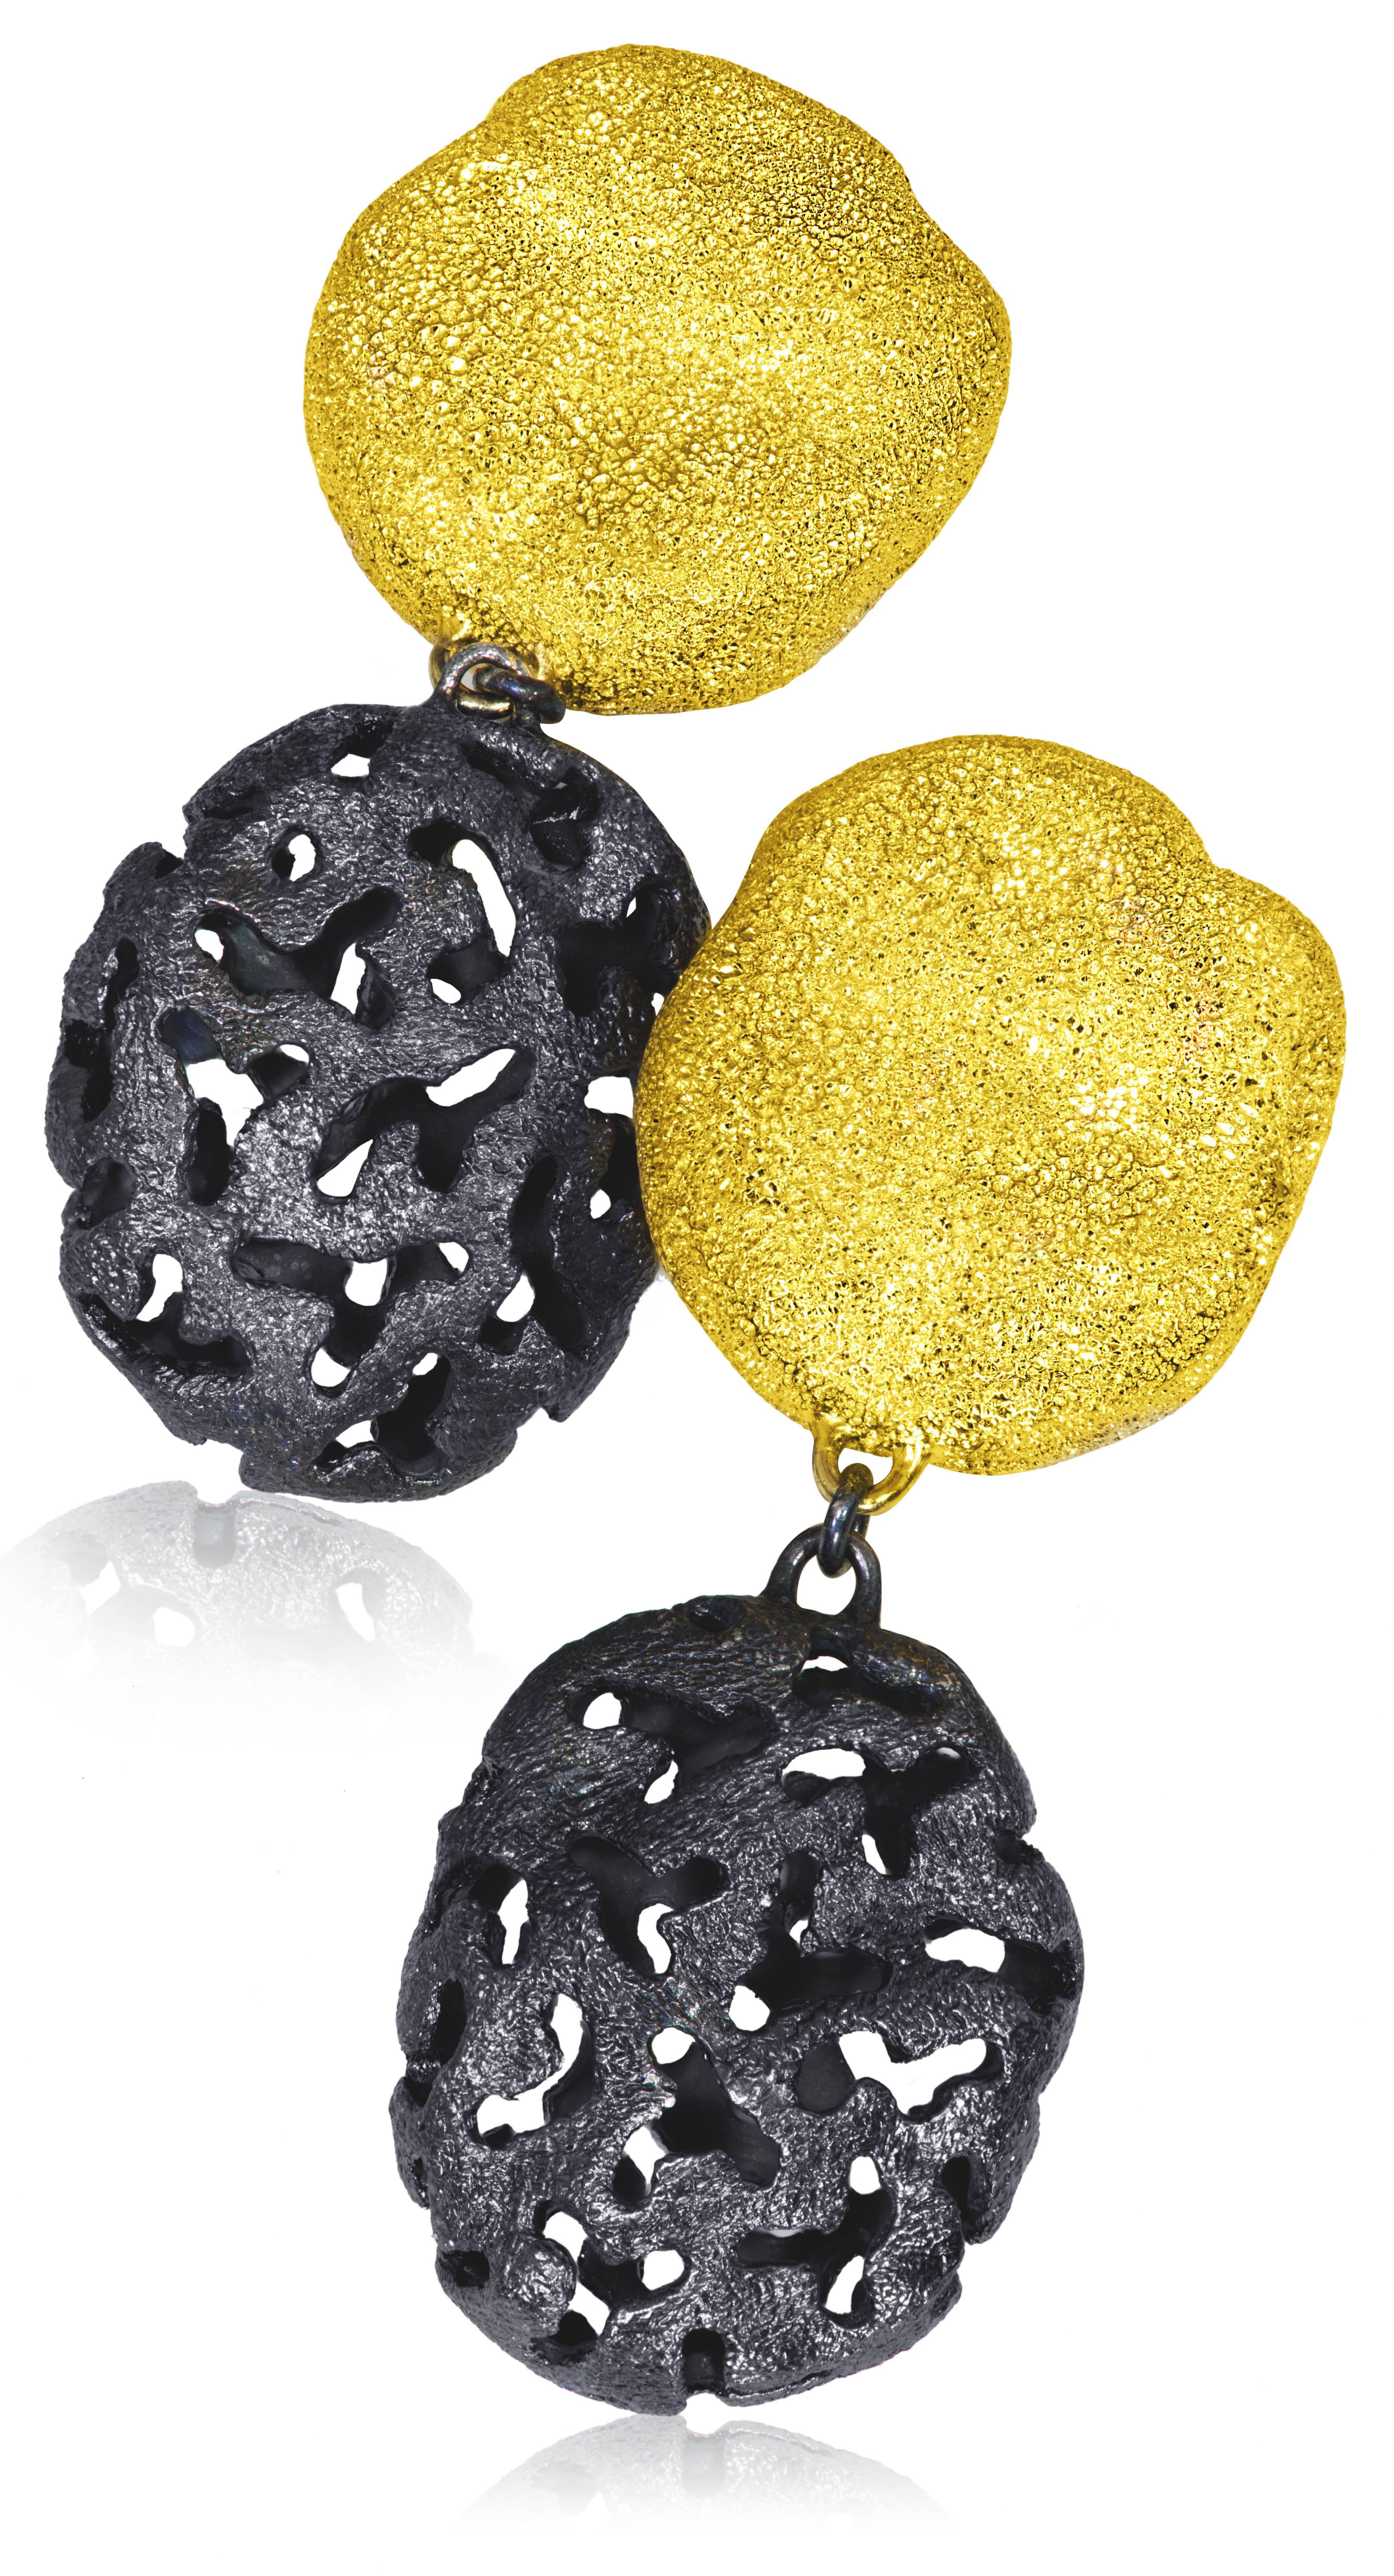 Alex Soldier Moneta Clip Earrings made in silver with 24k yellow gold and dark platinum (rhodium) infusion (deep plating) and signature metalwork that creates an illusion of a diamond inlay. Handmade in NYC. $550.   

Key Facts About The Artist: